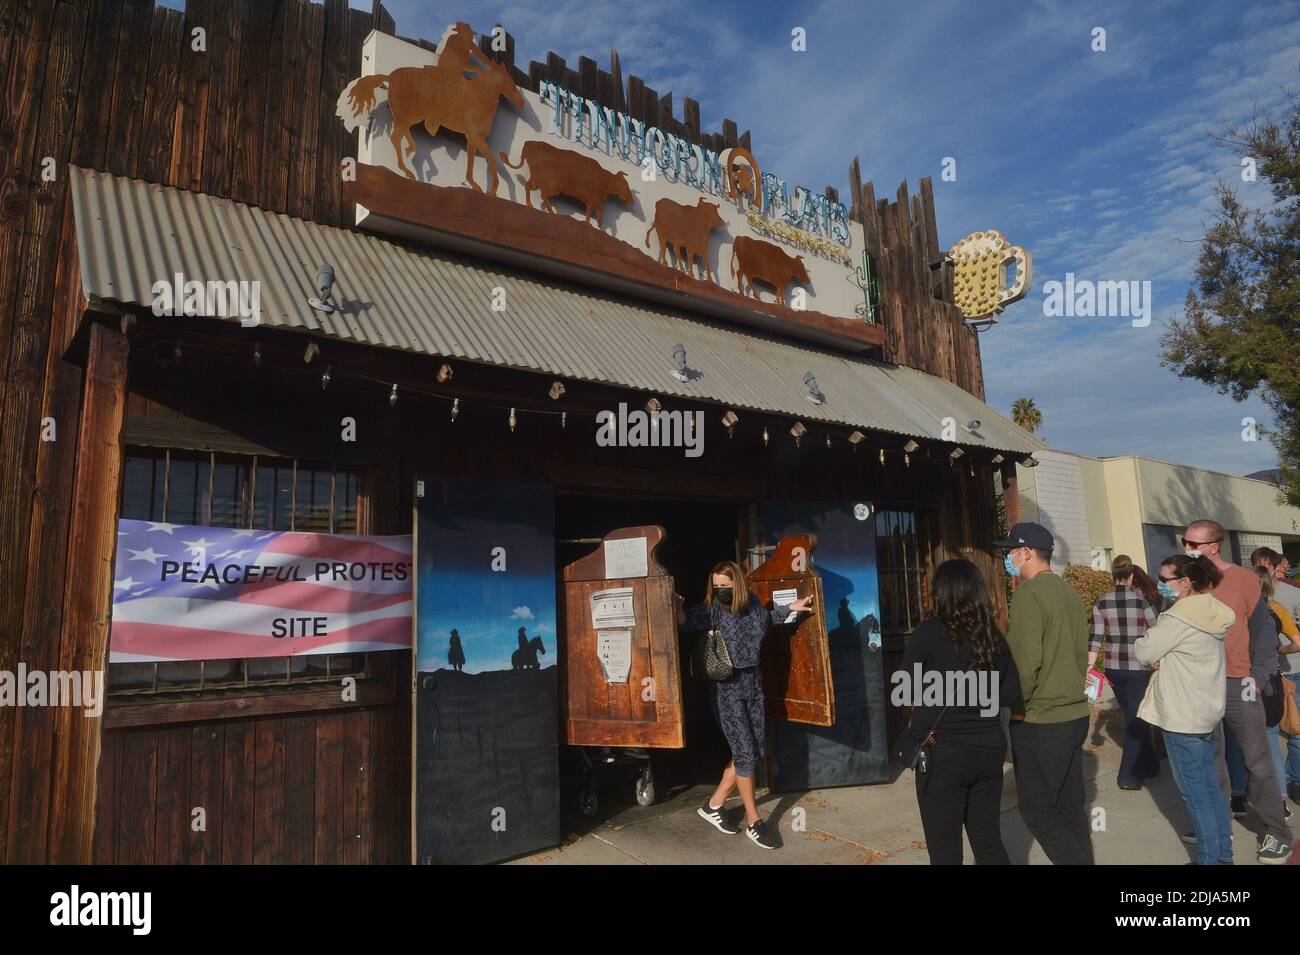 Burbank, United States. 14th Dec, 2020. Patrons gather at the Tinhorn Flats  Saloon and Grill in Burbank, California on Sunday, December 13, 2020. The  popular sports bar is defying Gov. Newsom's order